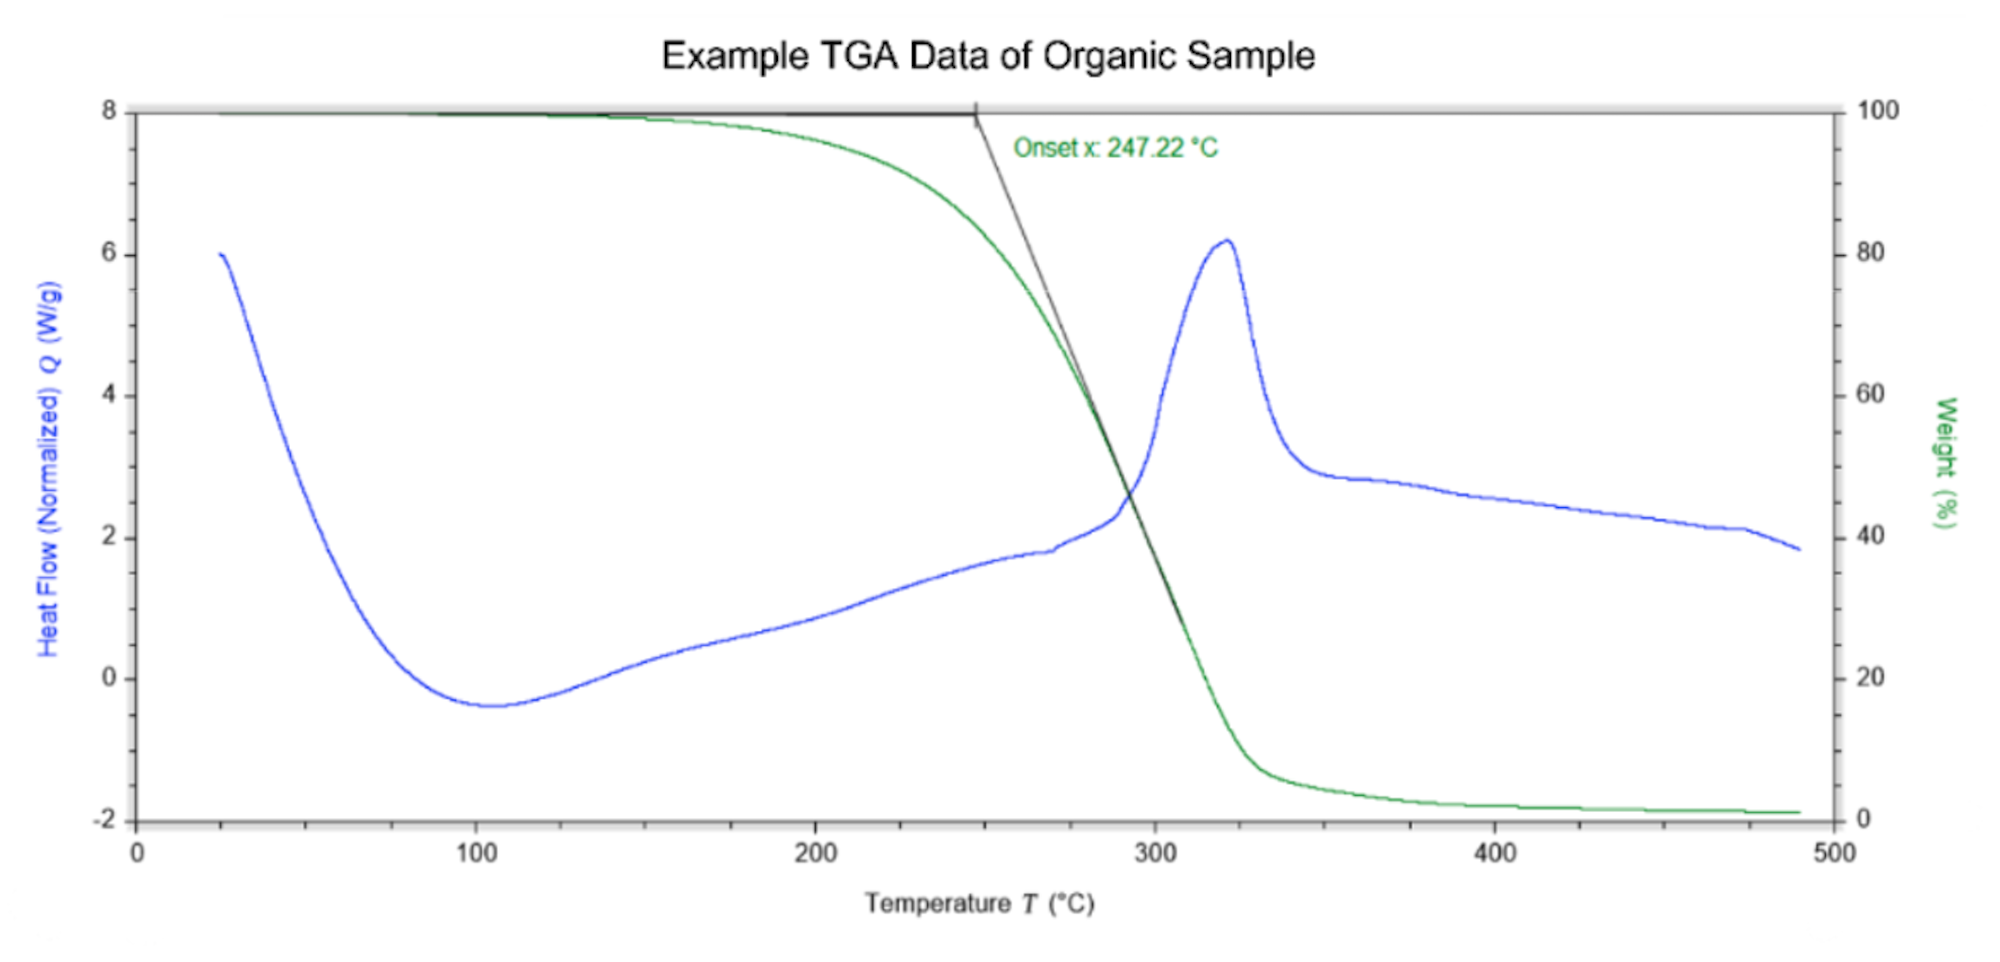 Thermogravimetric analysis dataset example of an organic sample heated to 500C in air